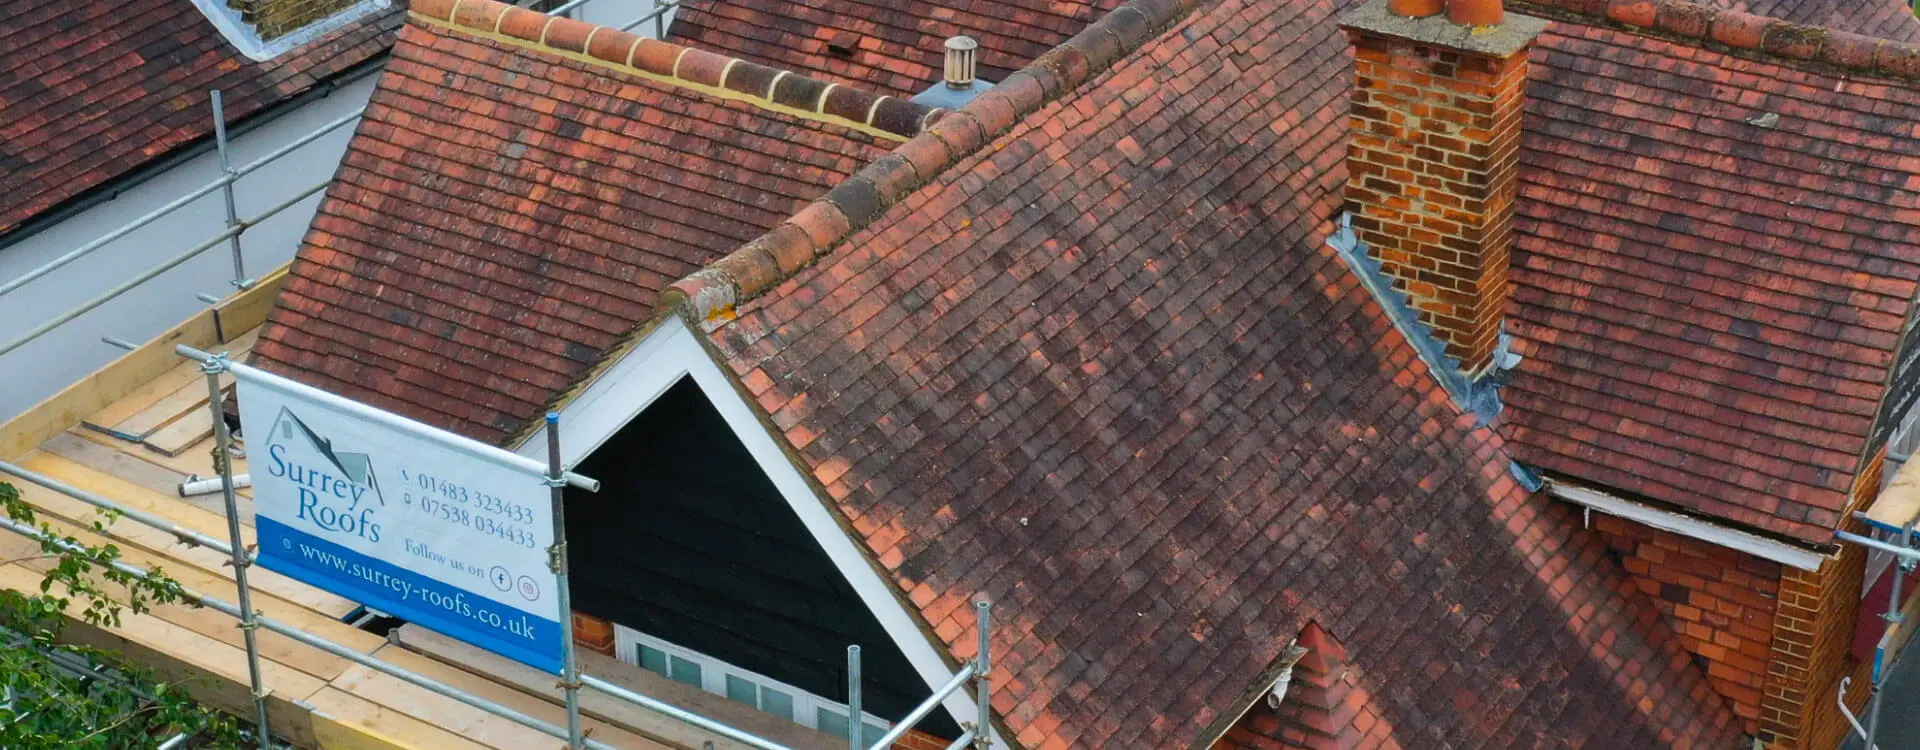 Professional Roofing & Building Services in Surrey